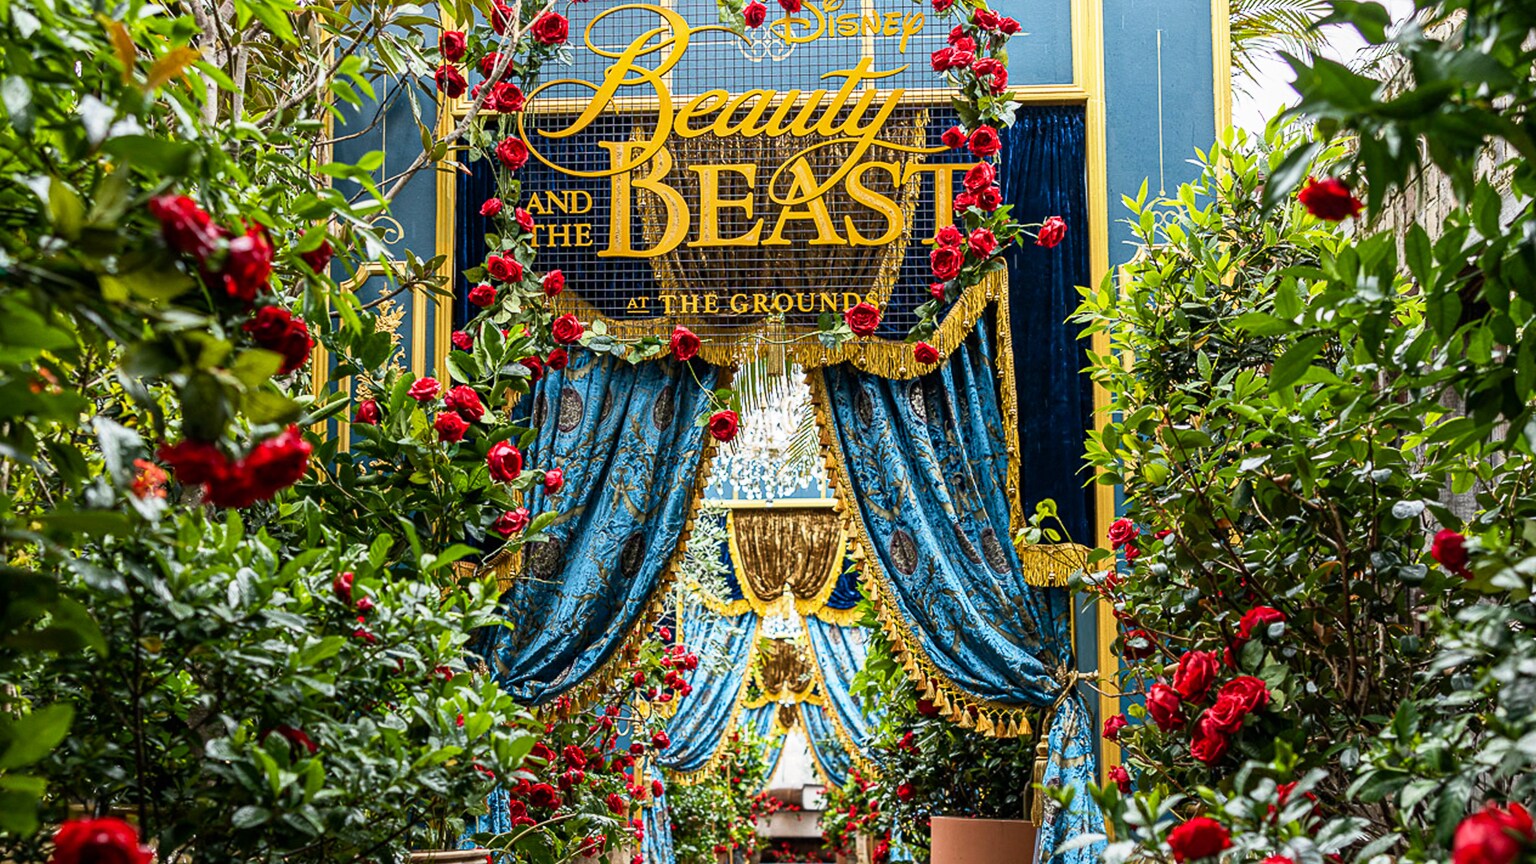 A walkway with blooming red rose bushes on either side leads to a Beauty and the Beast sign hanging above blue curtains 